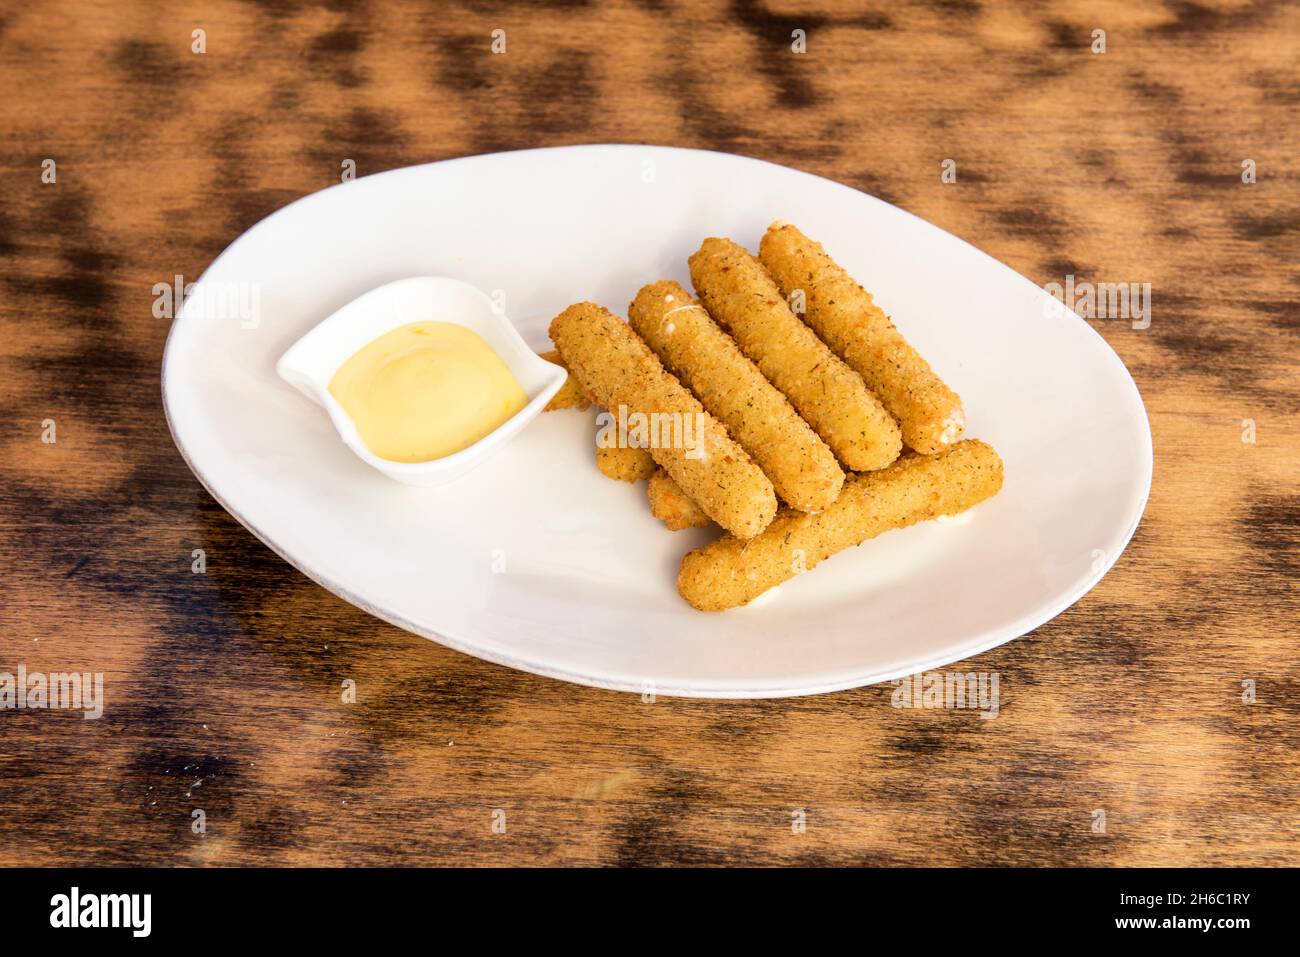 Ration of mozzarella sticks battered and fried in olive oil with mayonnaise sauce for dipping on a white plate Stock Photo